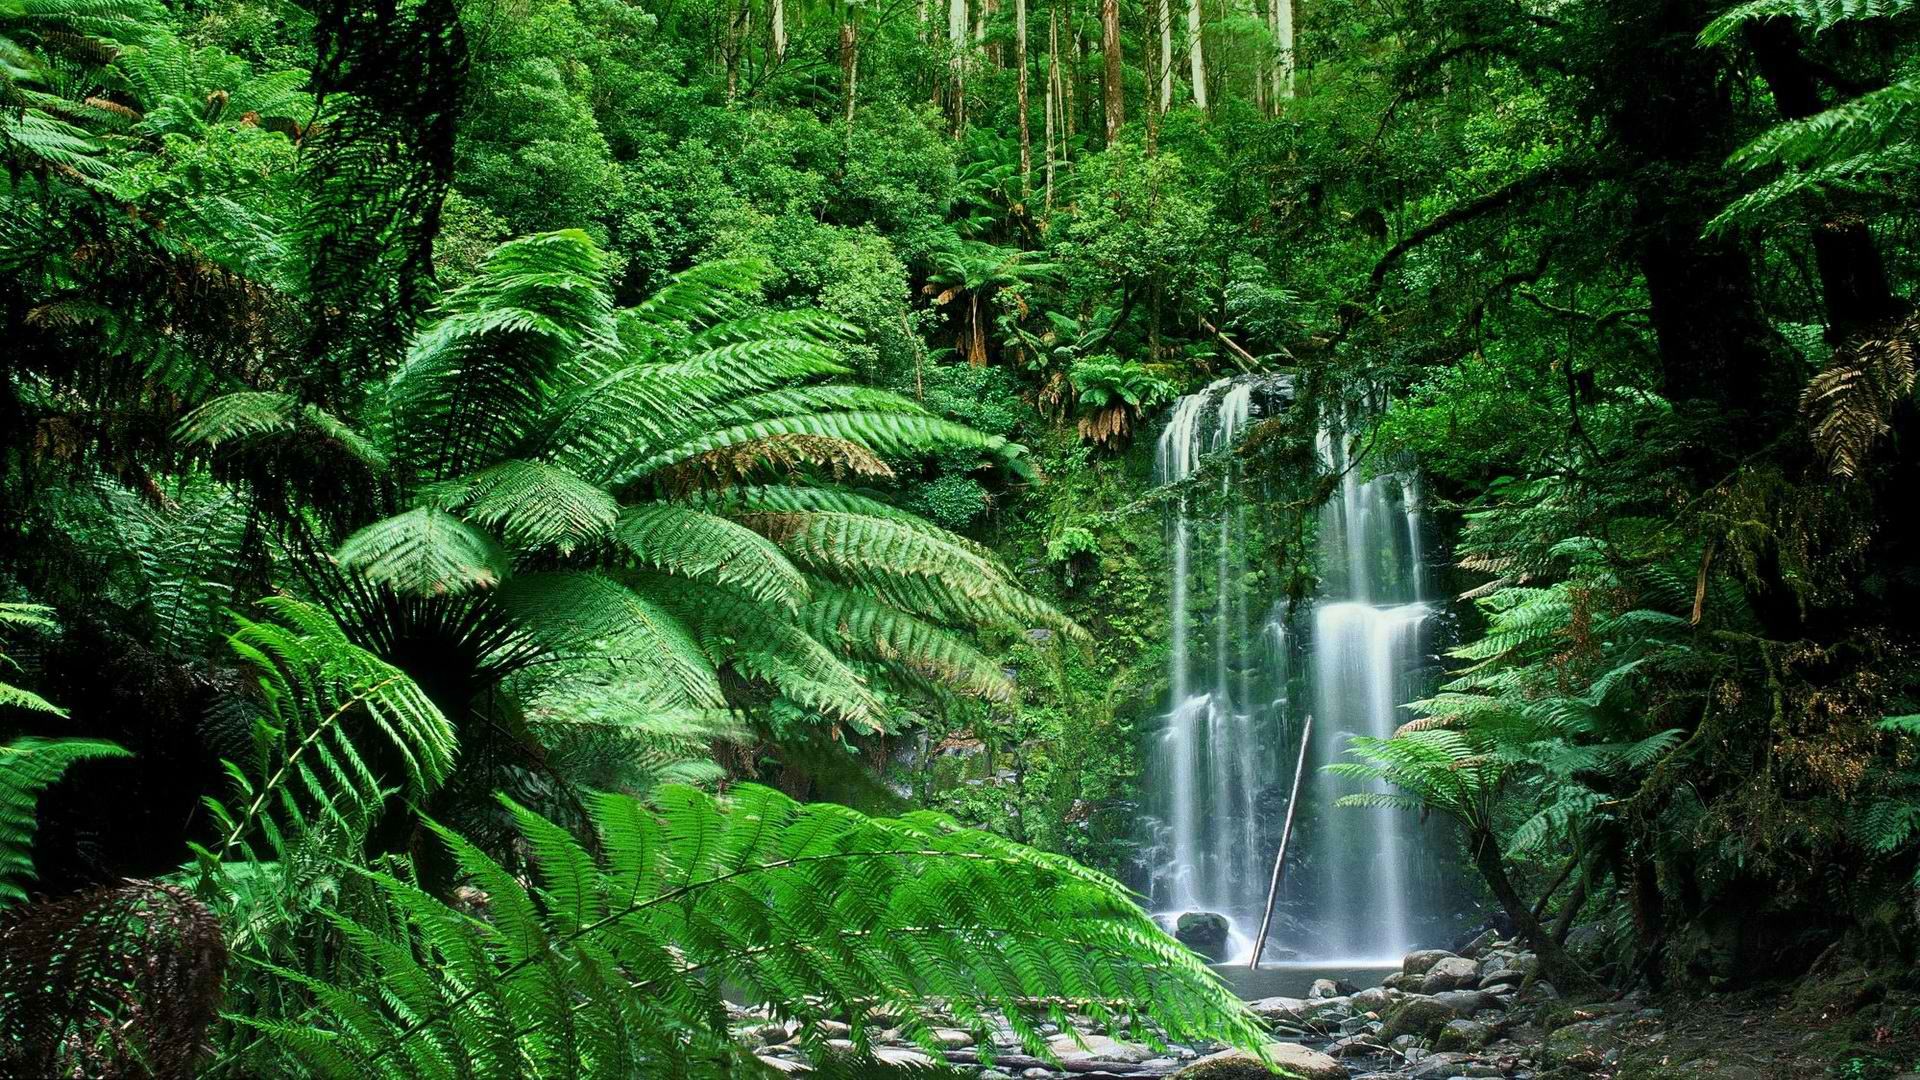 General 1920x1080 forest Australia nature plants waterfall